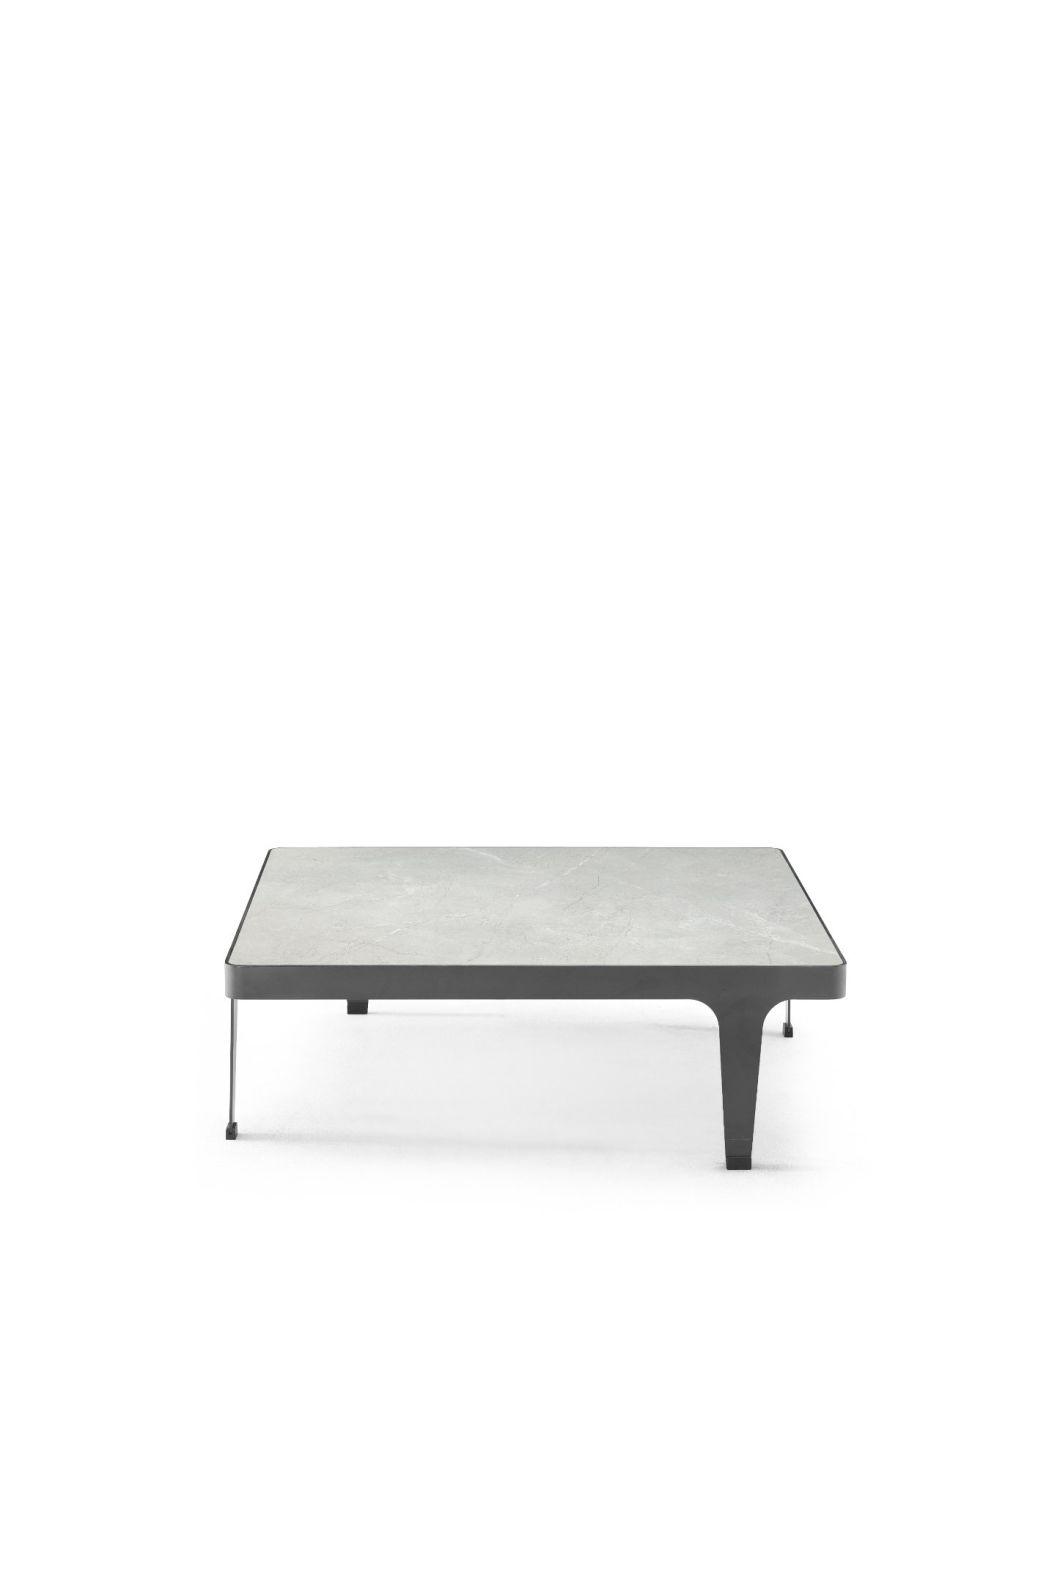 M-Cj003b Coffee Table, Modern Deign in Home and Hotel Furniture